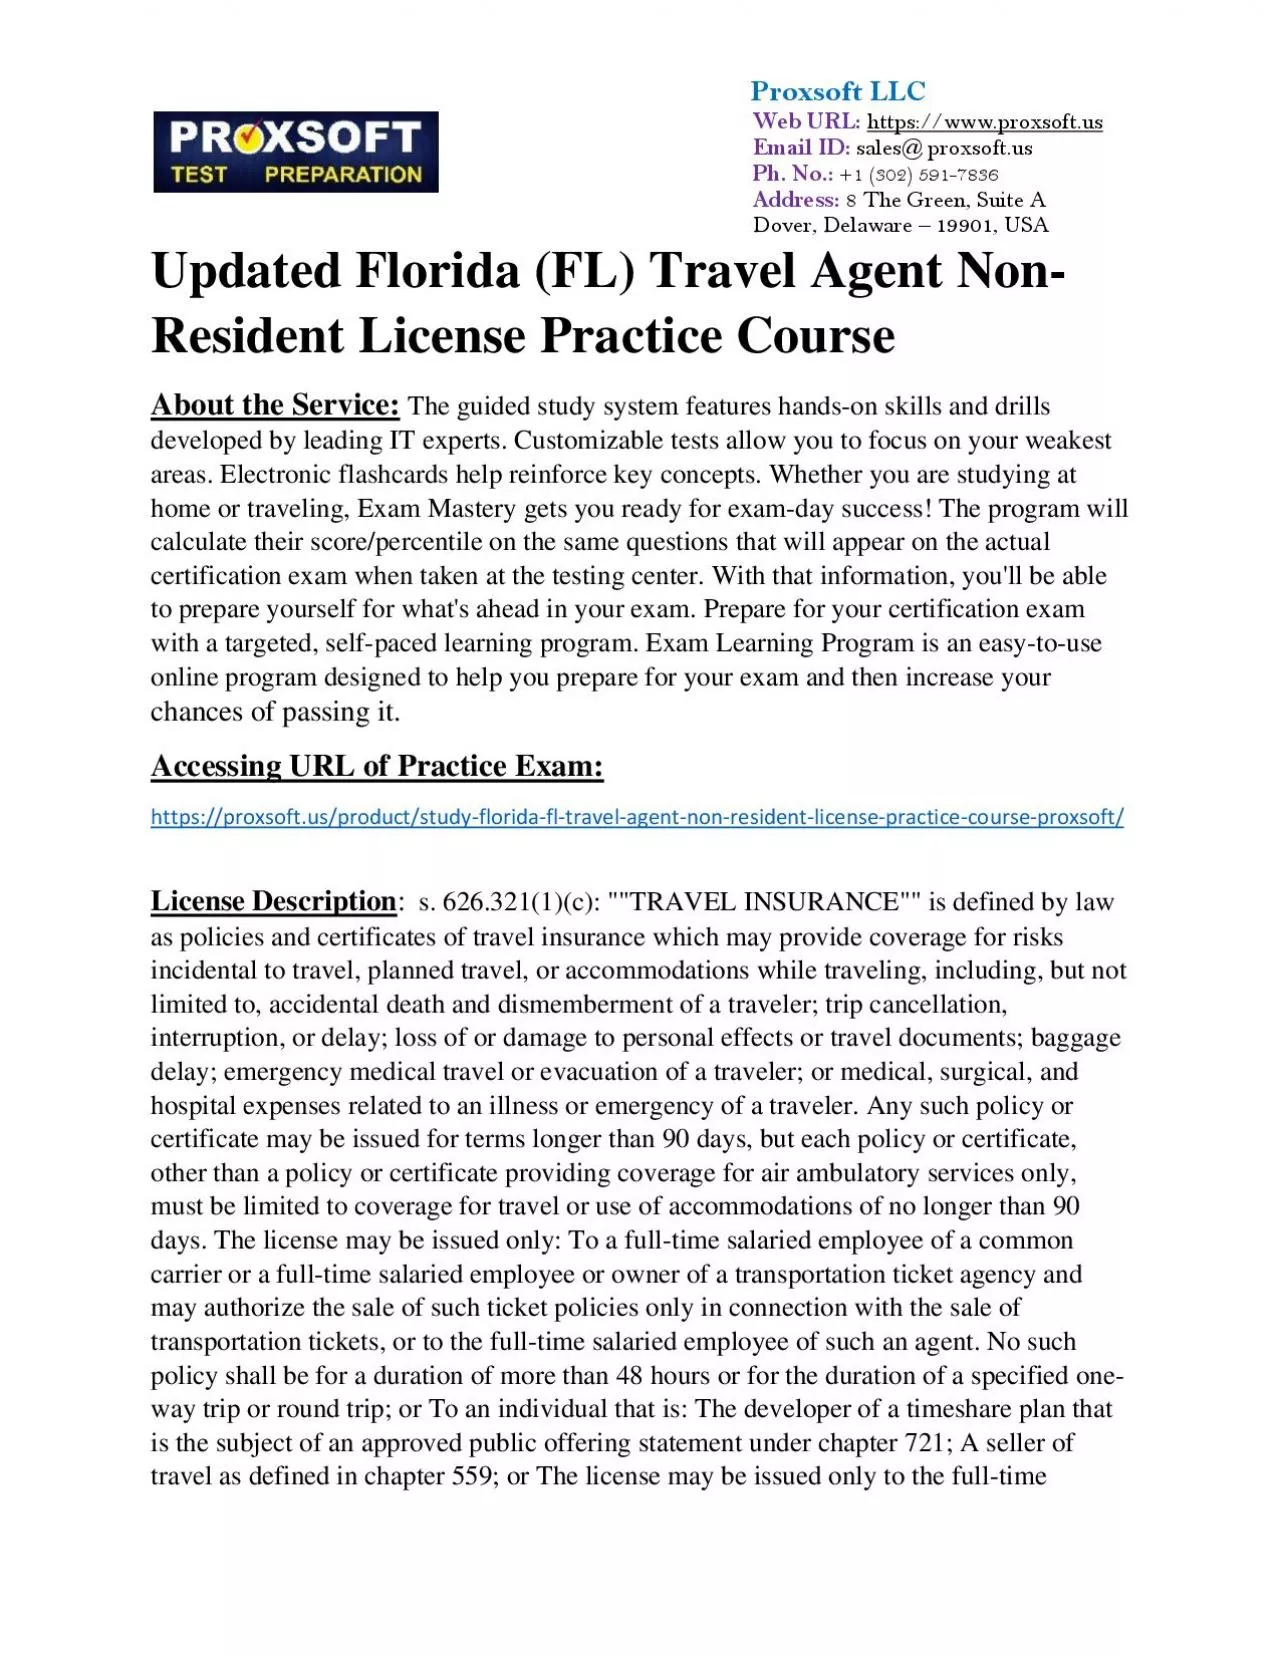 Updated Florida (FL) Travel Agent Non-Resident License Practice Course